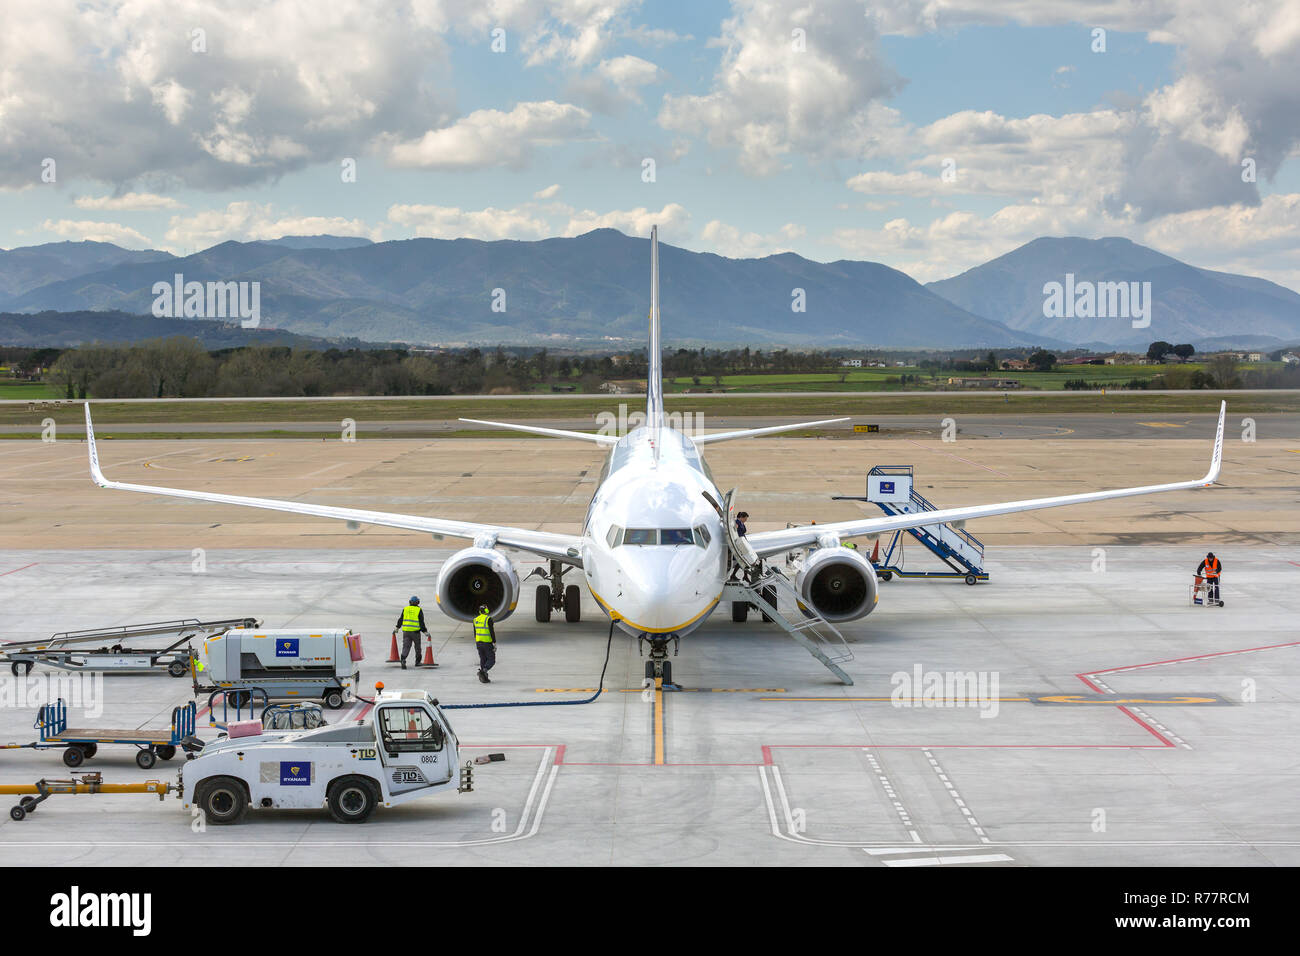 Girona, Spain - March 29, 2018: Ryanair airline airplane Boeing 737 in Girona airport in sunny day Stock Photo